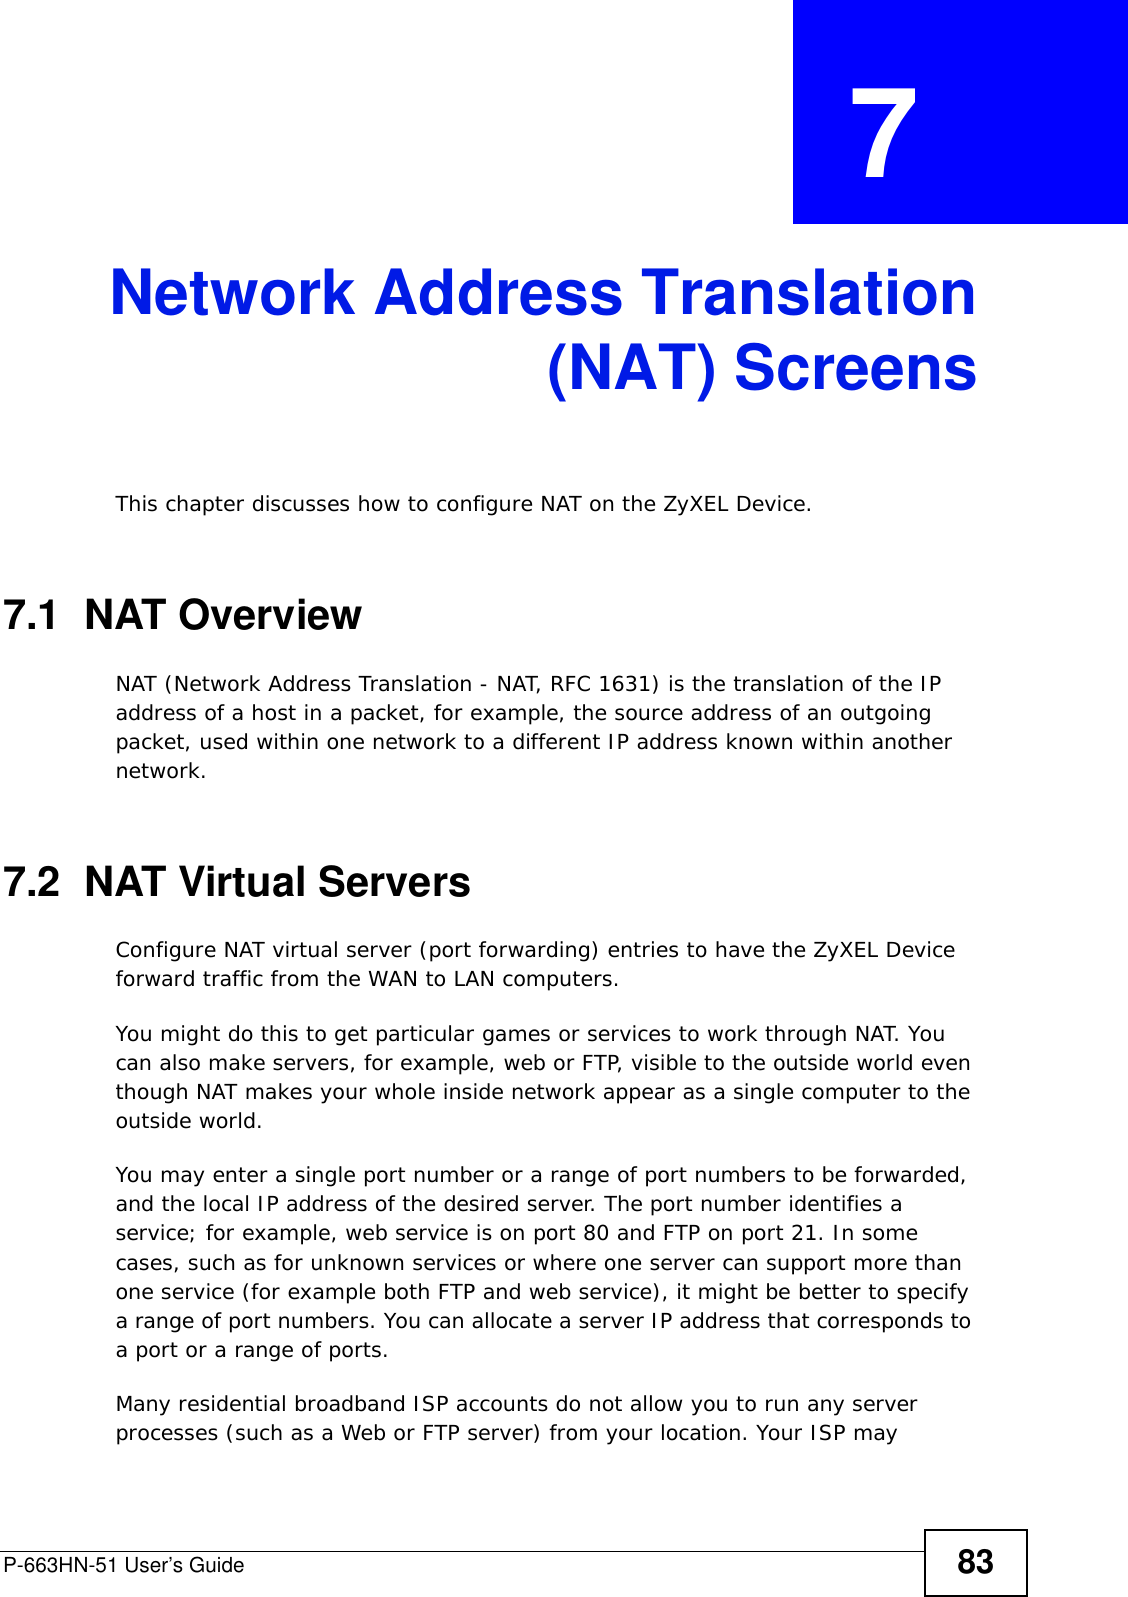 P-663HN-51 User’s Guide 83CHAPTER  7 Network Address Translation(NAT) ScreensThis chapter discusses how to configure NAT on the ZyXEL Device.7.1  NAT Overview NAT (Network Address Translation - NAT, RFC 1631) is the translation of the IP address of a host in a packet, for example, the source address of an outgoing packet, used within one network to a different IP address known within another network. 7.2  NAT Virtual Servers Configure NAT virtual server (port forwarding) entries to have the ZyXEL Device forward traffic from the WAN to LAN computers. You might do this to get particular games or services to work through NAT. You can also make servers, for example, web or FTP, visible to the outside world even though NAT makes your whole inside network appear as a single computer to the outside world. You may enter a single port number or a range of port numbers to be forwarded, and the local IP address of the desired server. The port number identifies a service; for example, web service is on port 80 and FTP on port 21. In some cases, such as for unknown services or where one server can support more than one service (for example both FTP and web service), it might be better to specify a range of port numbers. You can allocate a server IP address that corresponds to a port or a range of ports.Many residential broadband ISP accounts do not allow you to run any server processes (such as a Web or FTP server) from your location. Your ISP may 